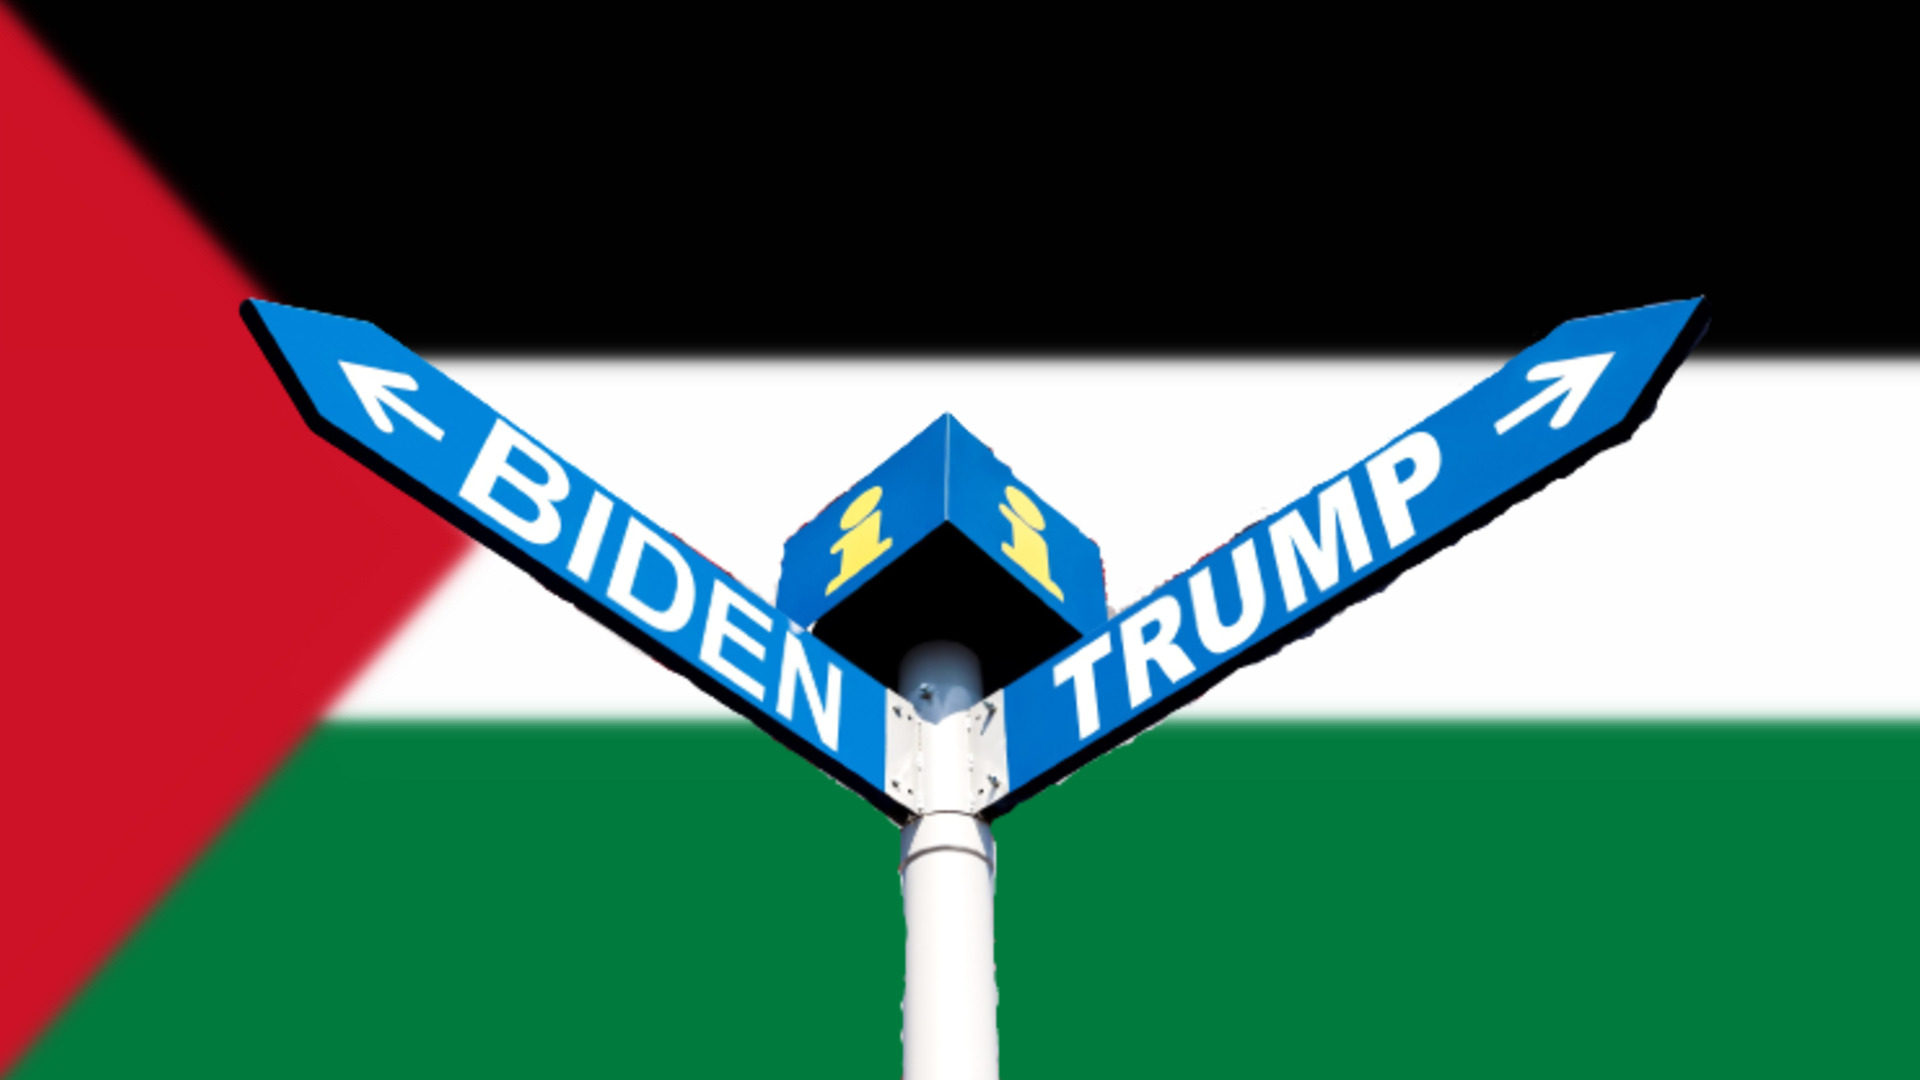 Palestinians Hoping a Biden Victory Will Enable Restoration of Relations With Washington (with VIDEO)